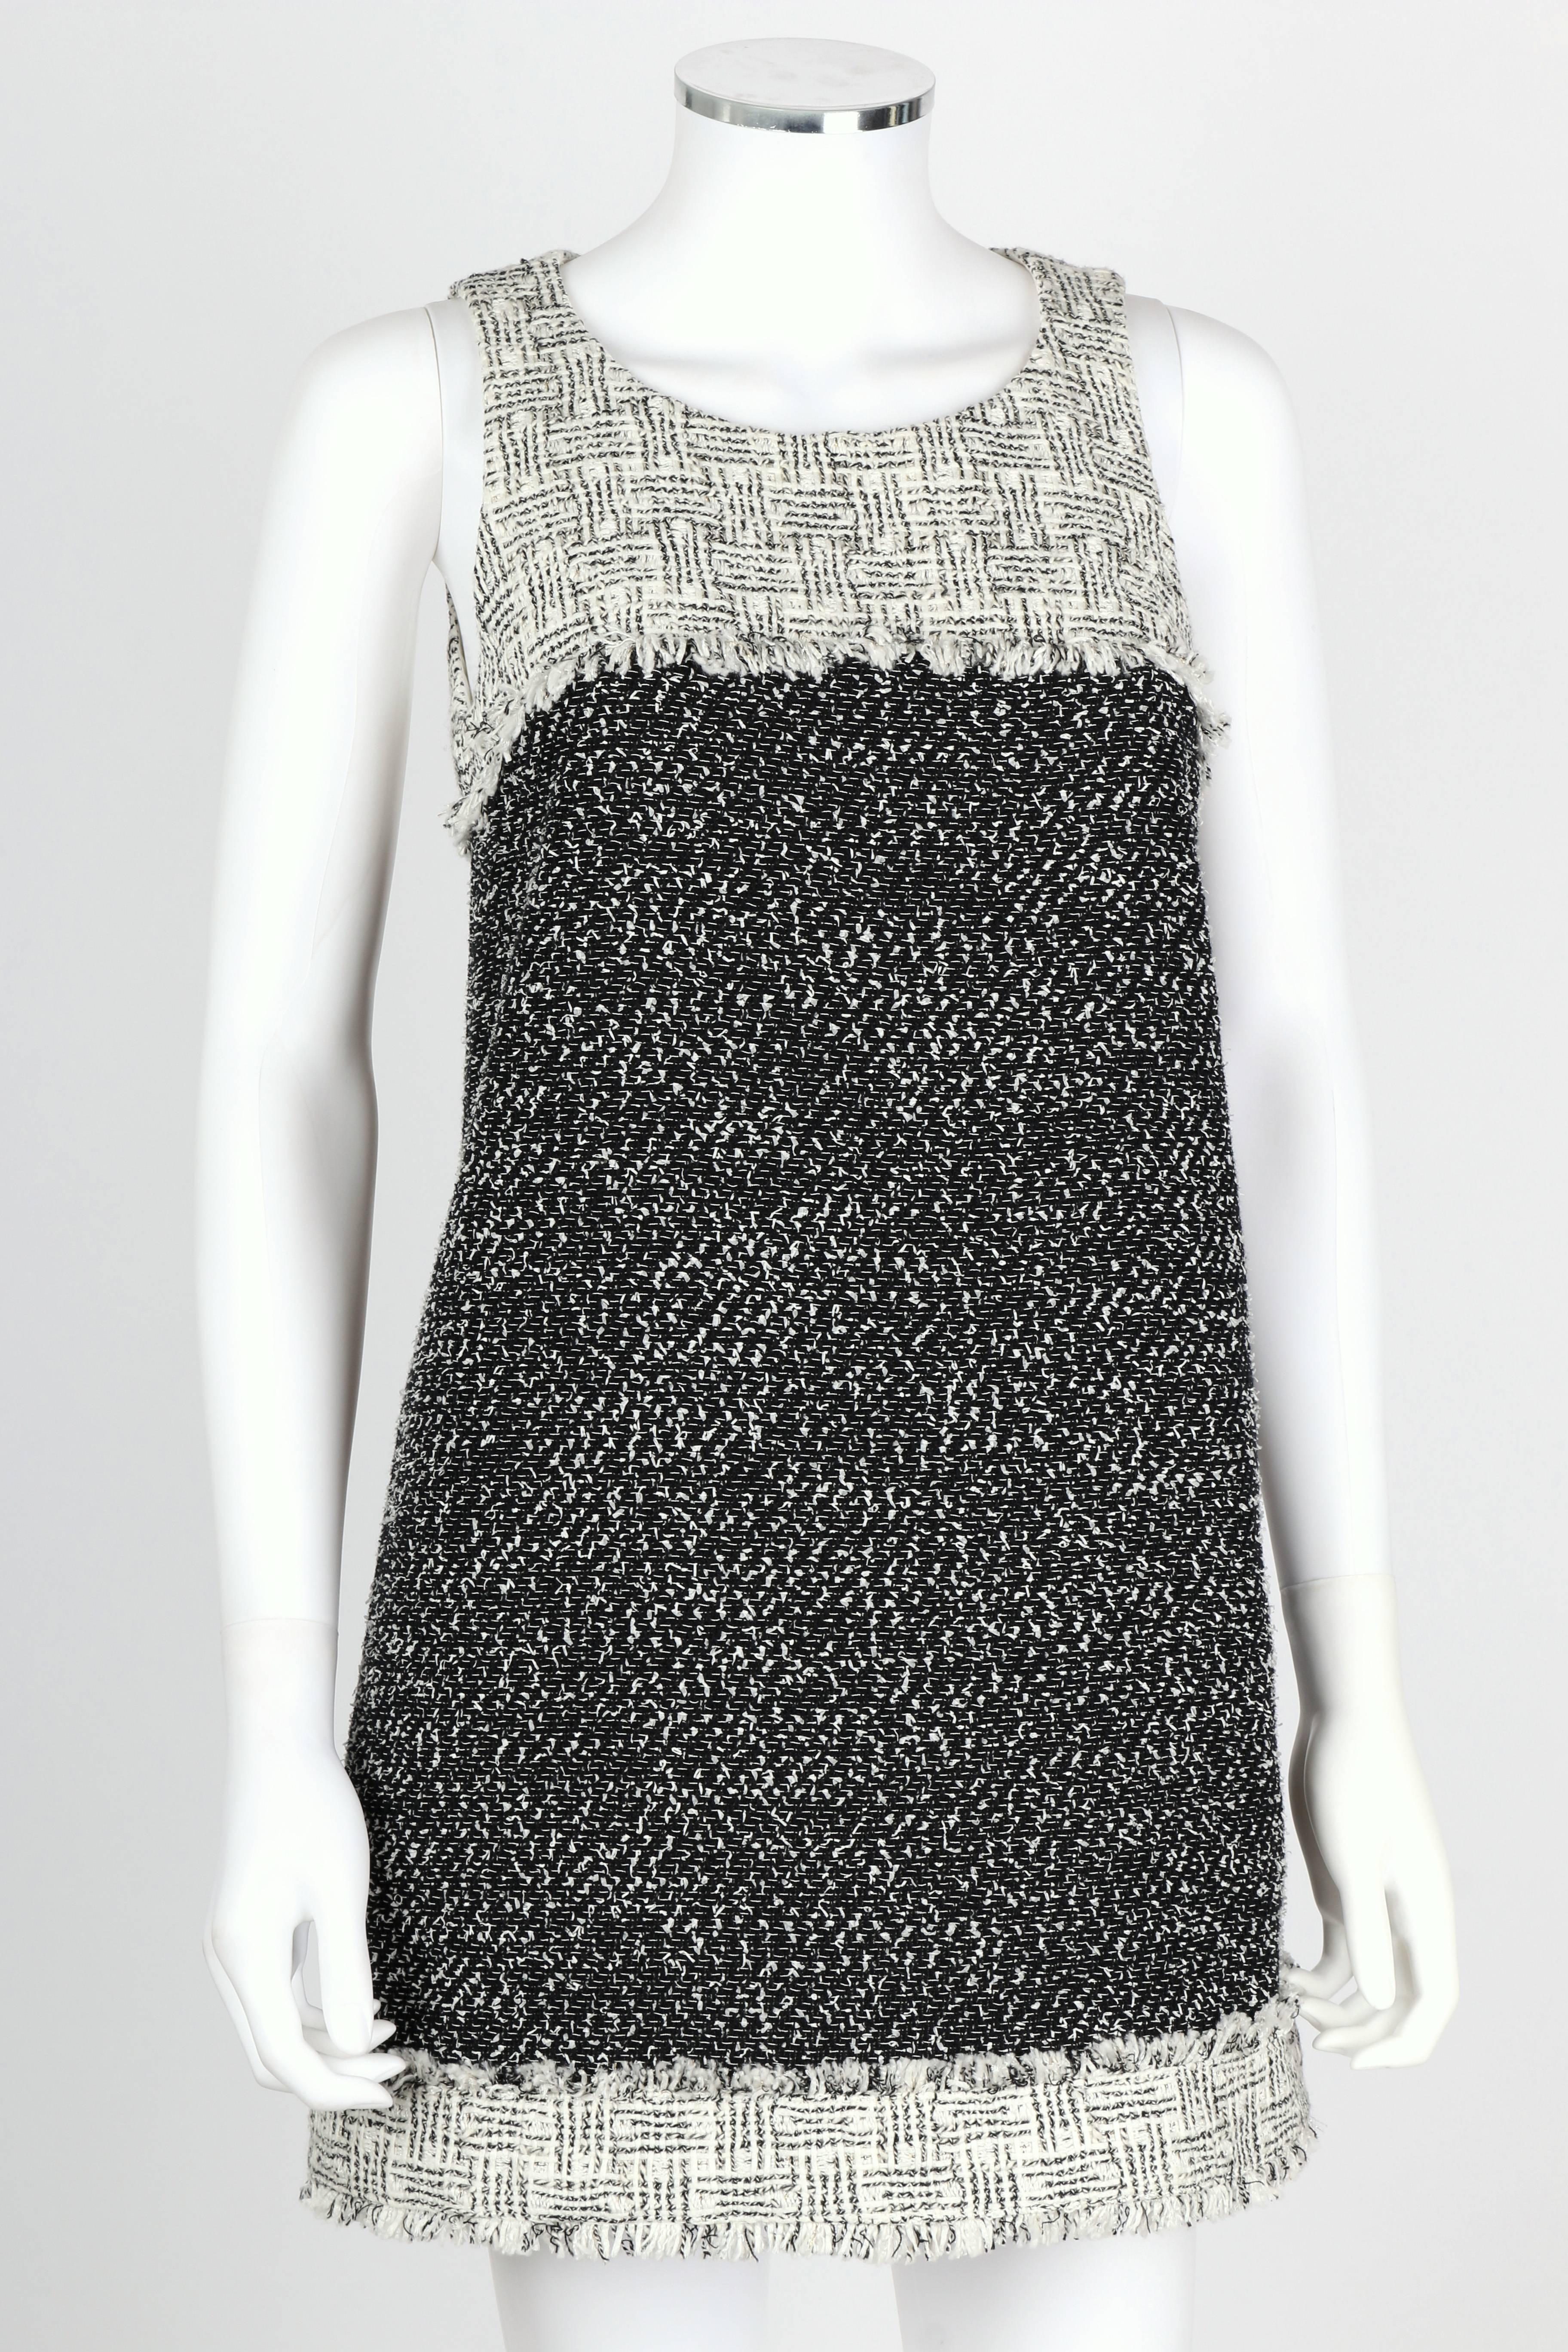 New with original tags attached. Chanel Spring 2014 black and white tweed / boucle mini shift dress. Sleeveless with a scoop neckline. Open thin keyhole upper back closes at back of neck with single hook/eye. Skirt closes at back with three snaps.